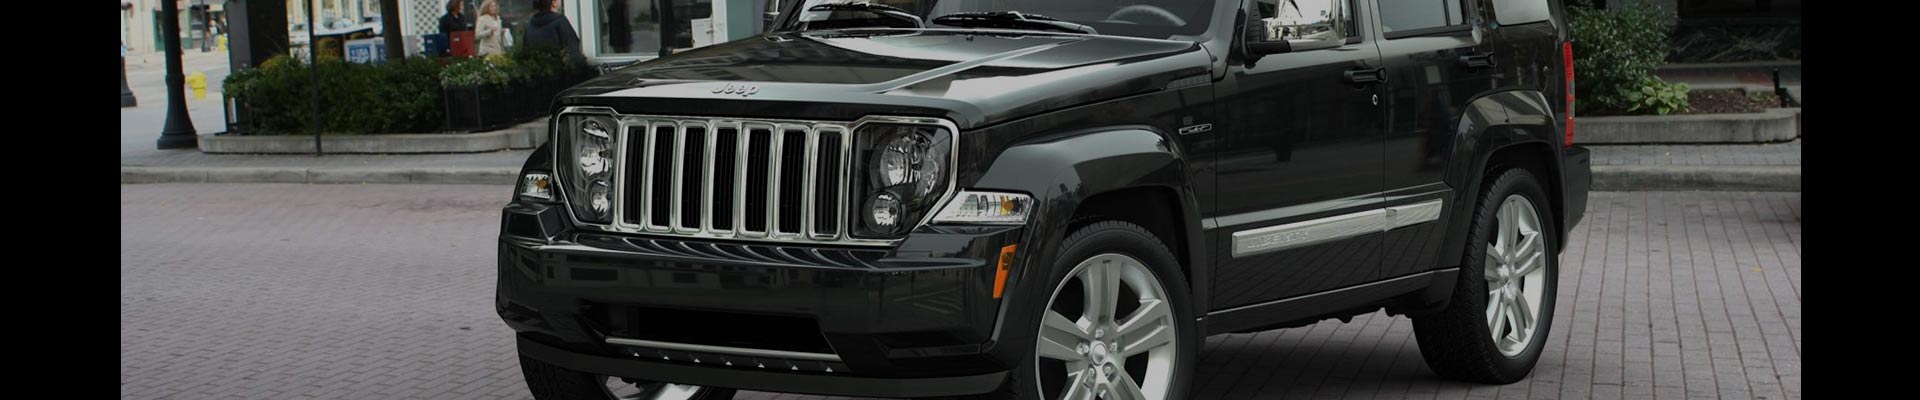 Shop Replacement and OEM 2003 Jeep Liberty Parts with Discounted Price on the Net